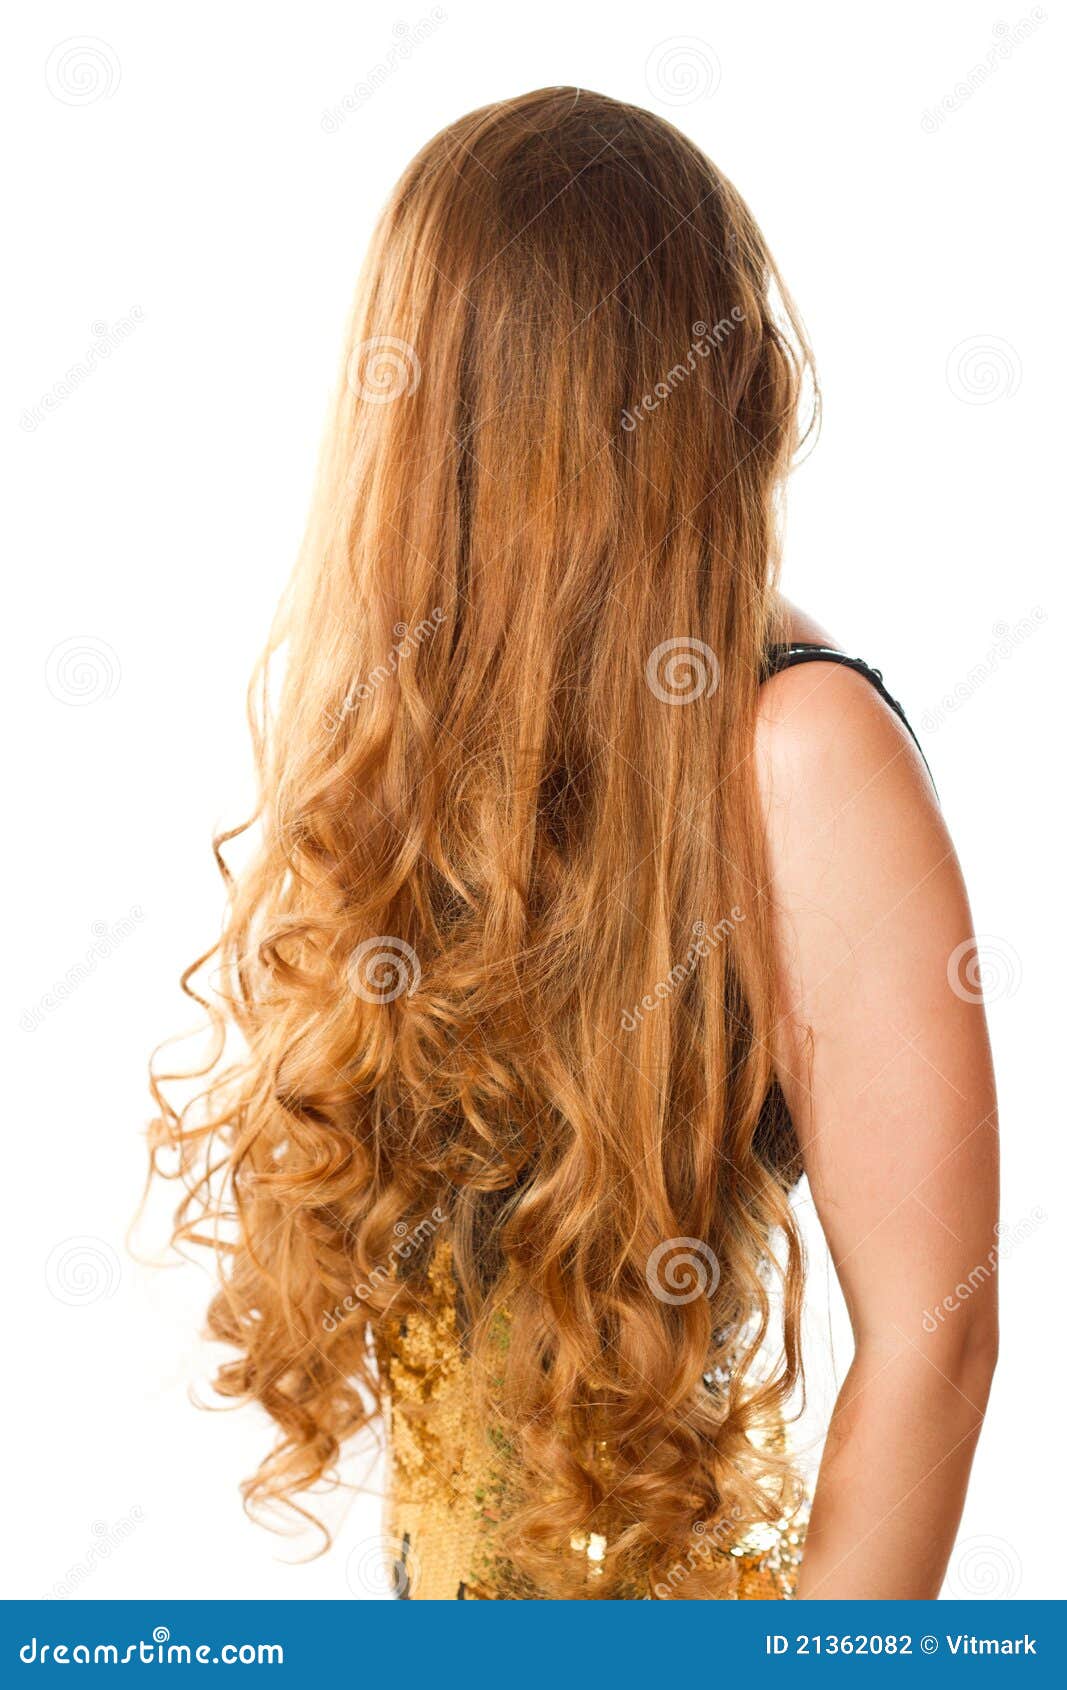 Hairstyle from Long Curly Hair Stock Photo - Image of woman, girl: 21362082